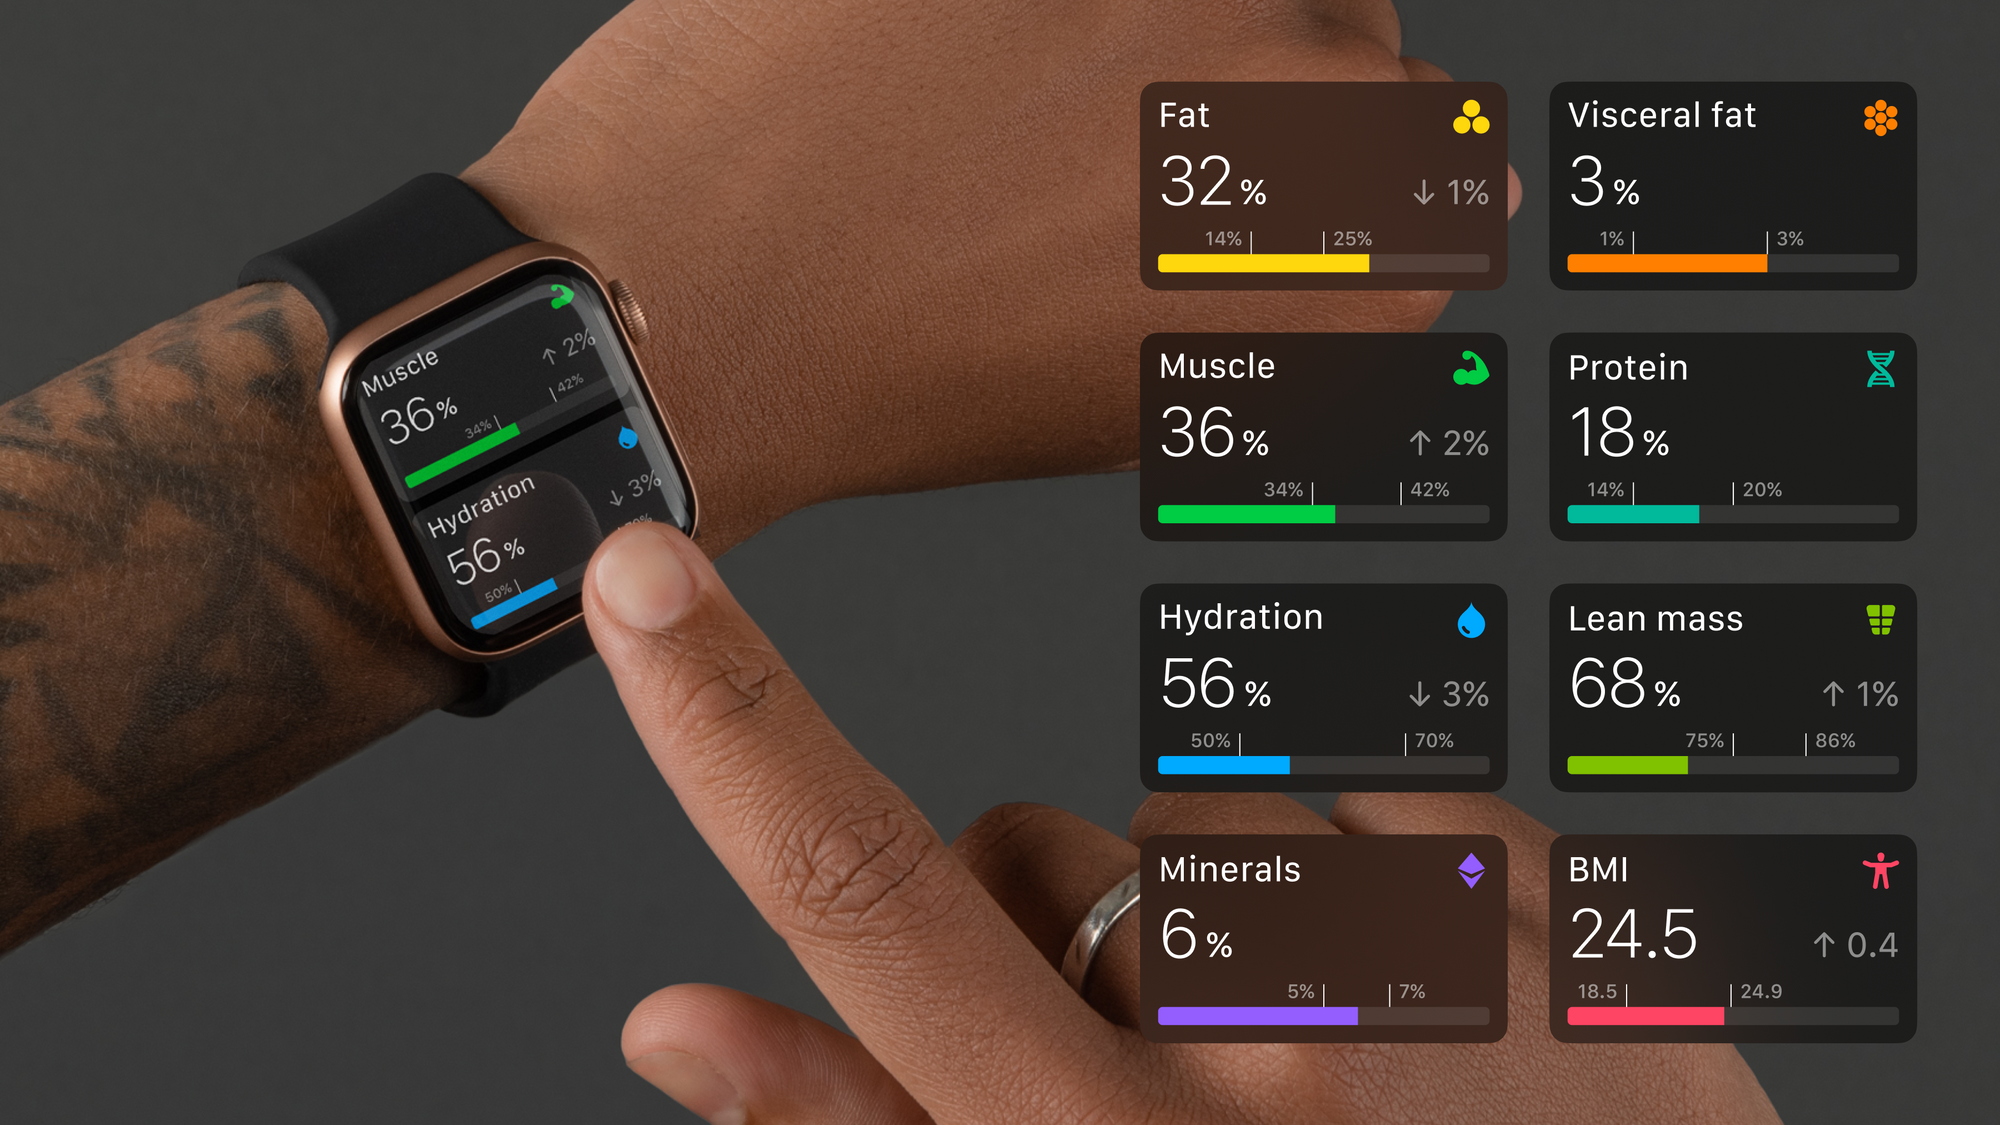 Why Aura Strap 2 and Apple Watch Make Fitness Tracking Revolutionary